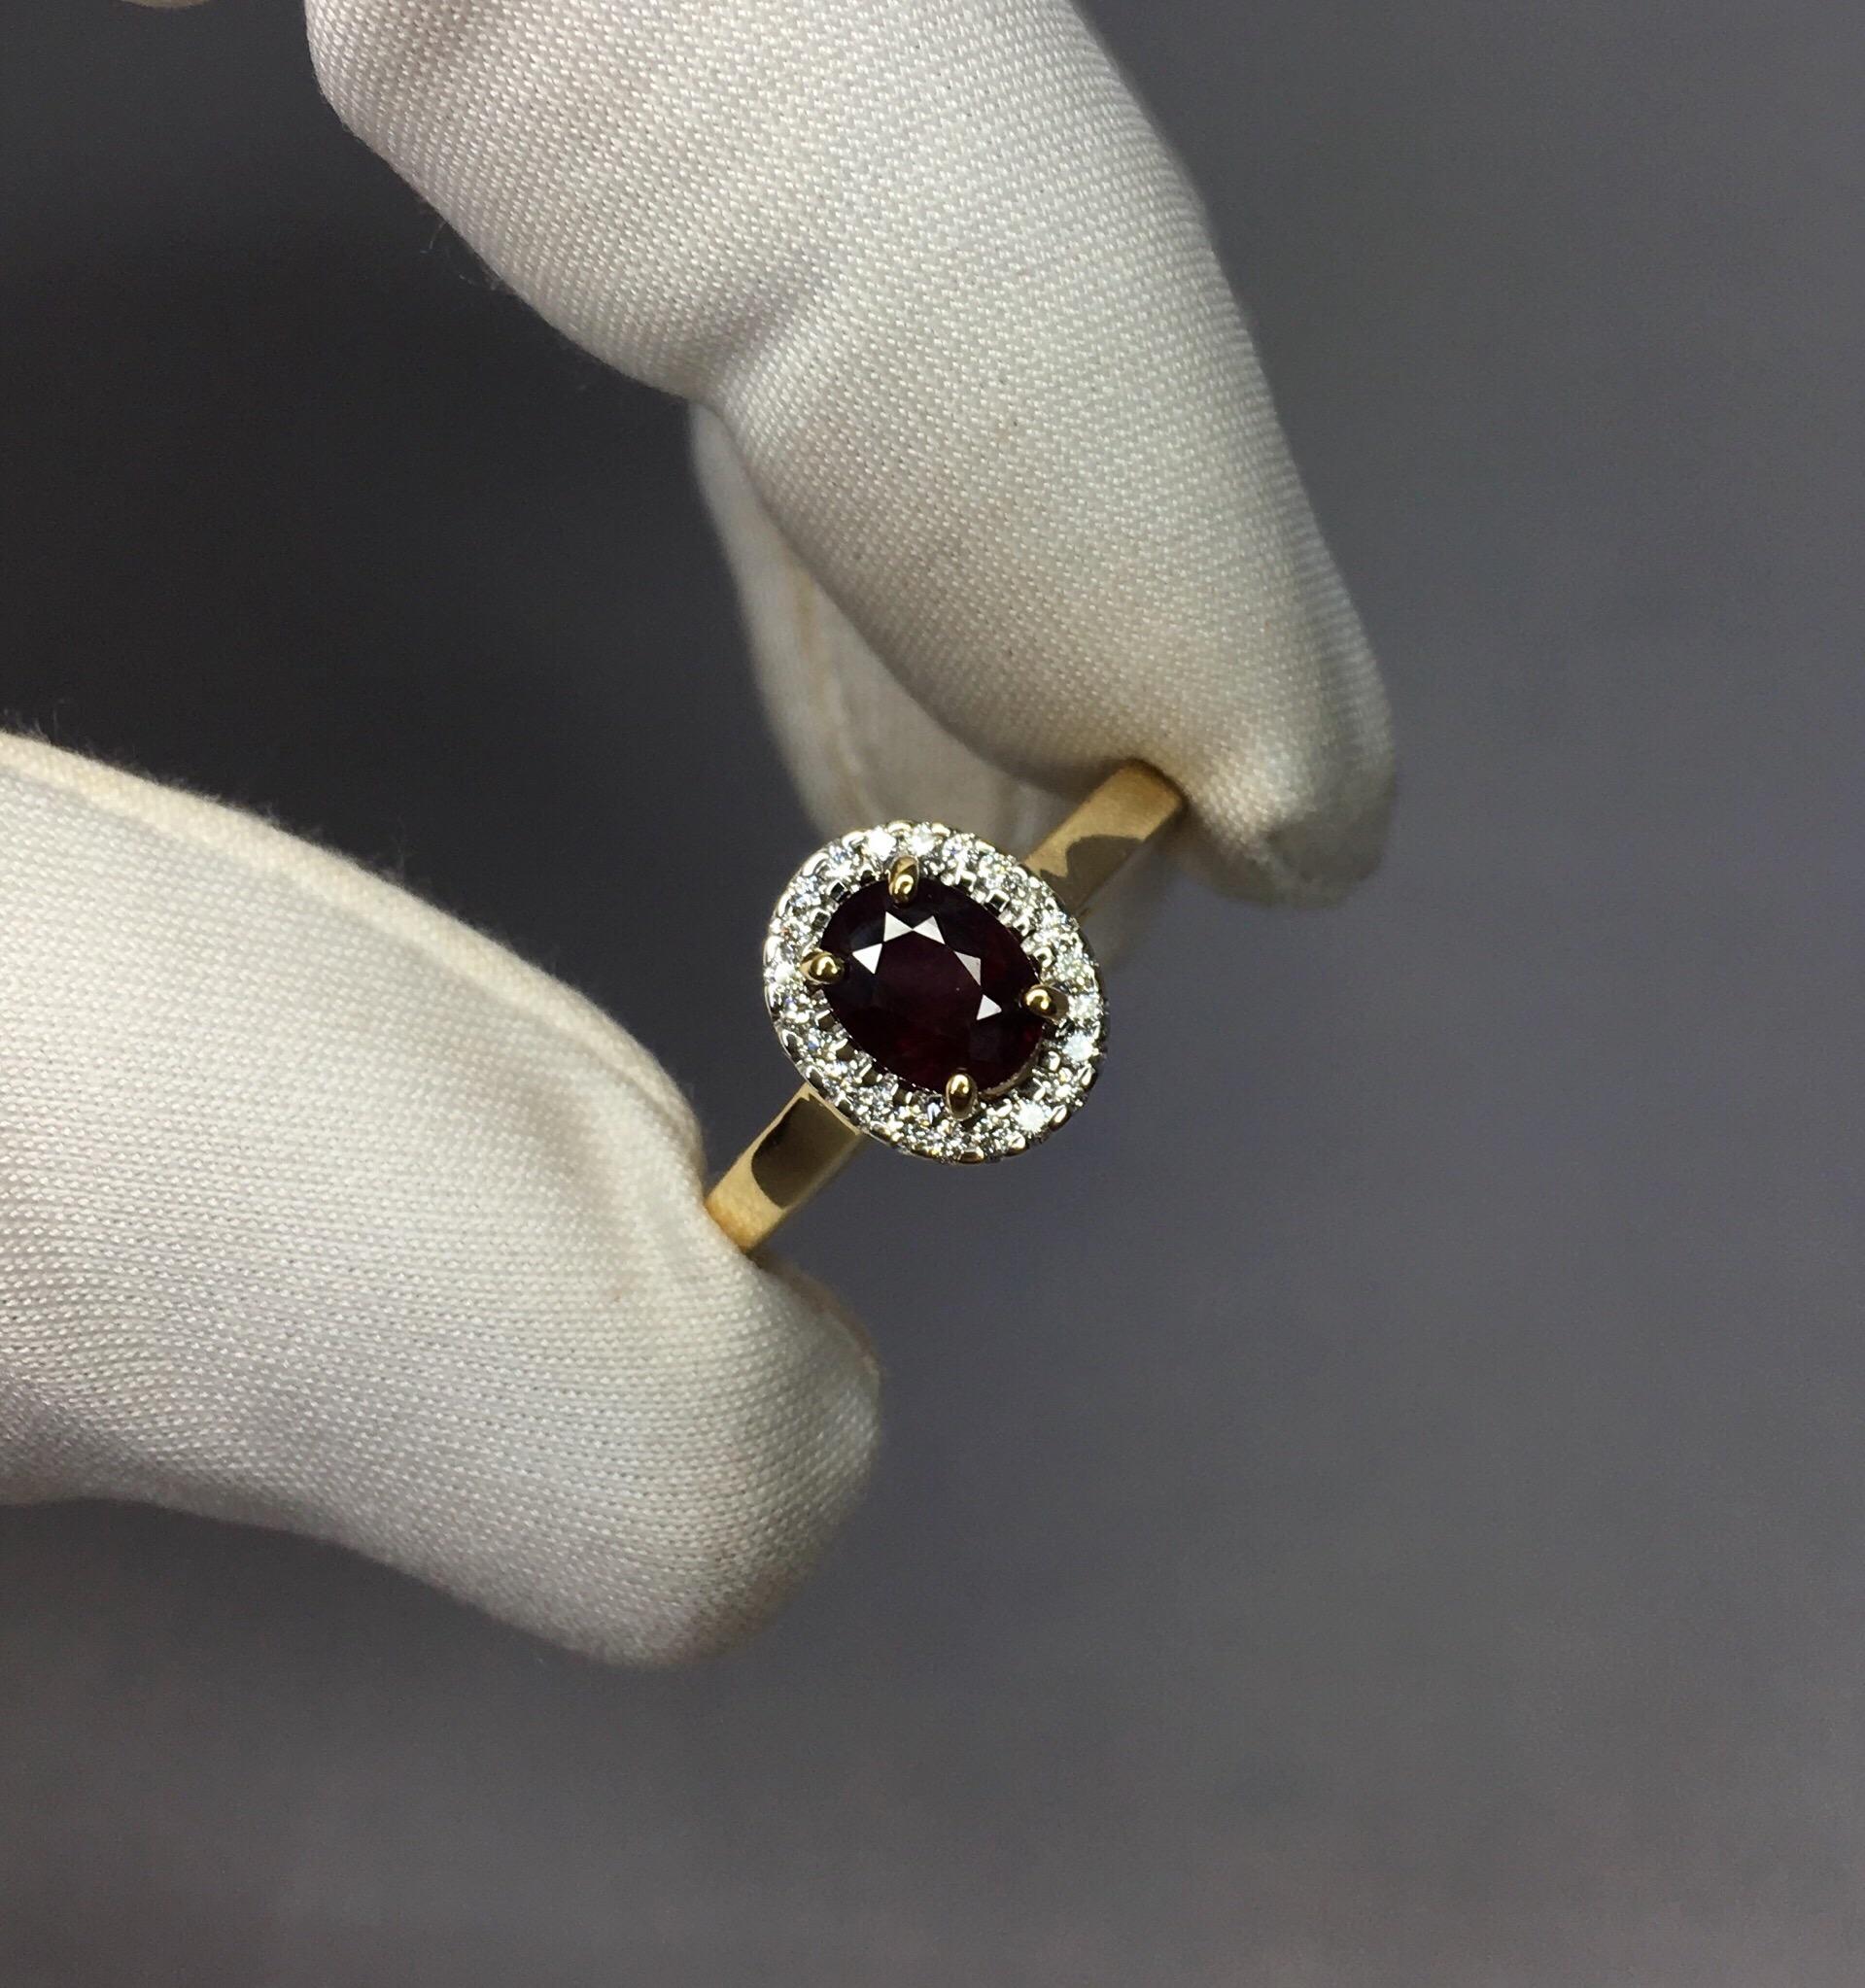 Stunning deep red untreated ruby set in a fine 18k yellow gold diamond halo ring. 

0.84 carat centre ruby with a beautiful deep purplish red colour.
Fully certified by IGI Antwerp confirming stone as untreated and from Madagascar.

Some inclusions